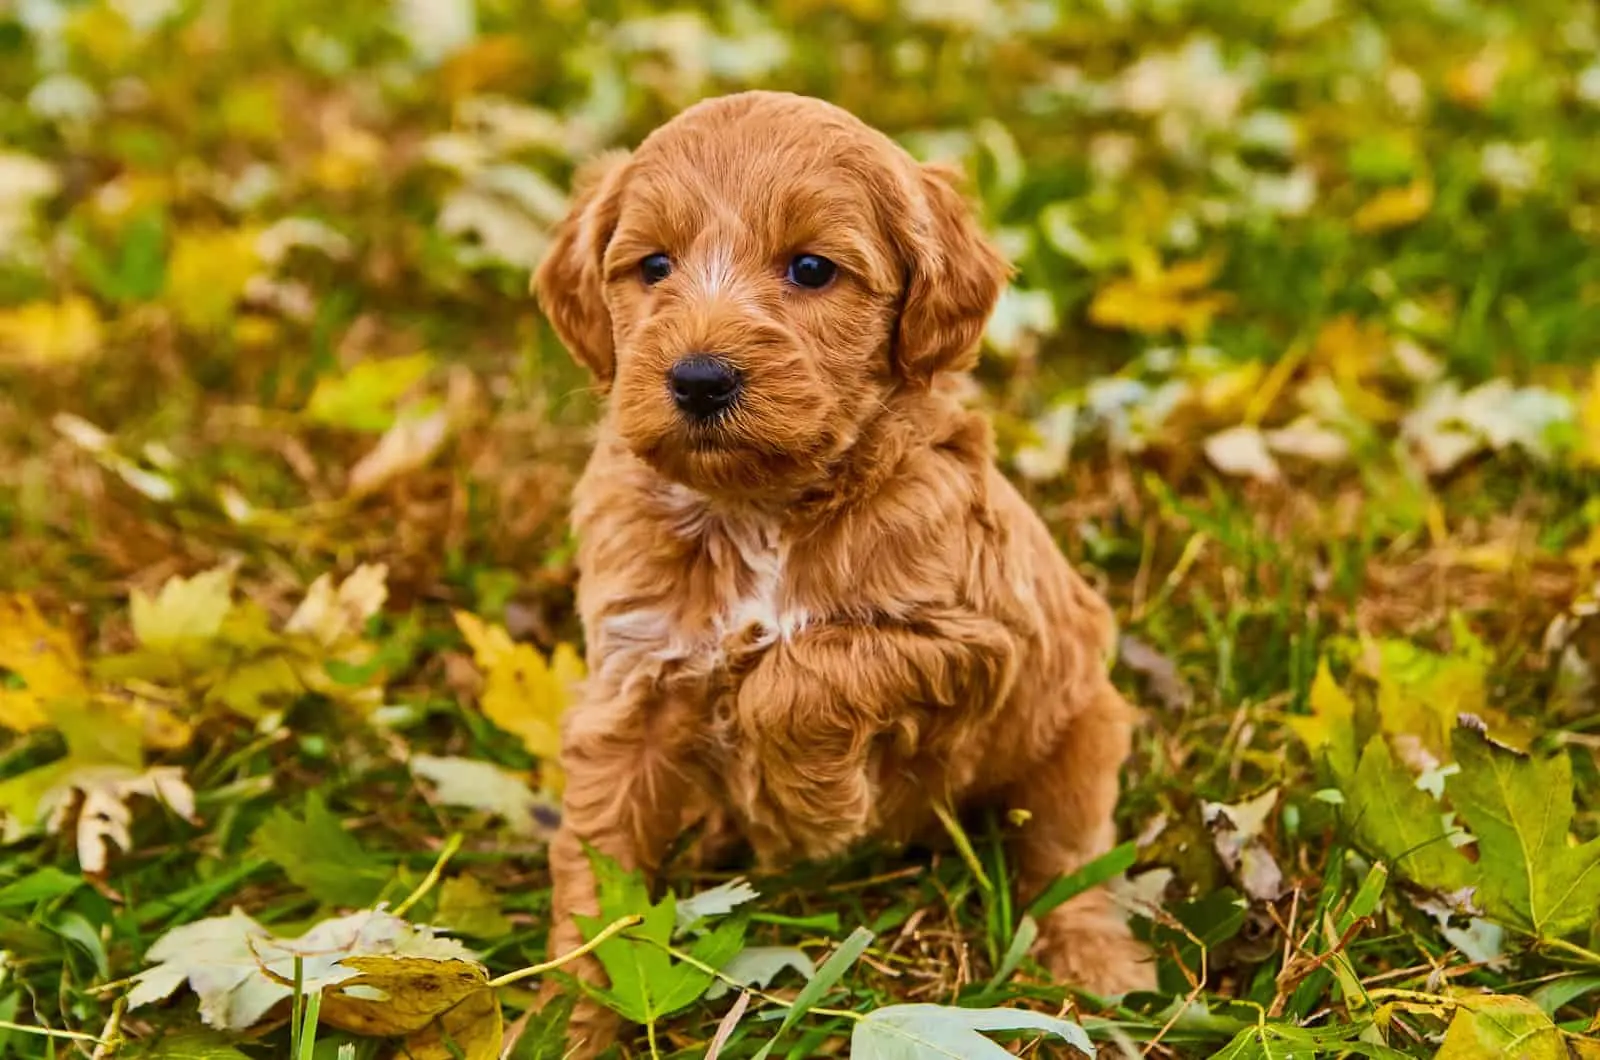 puppy playing on grass outside